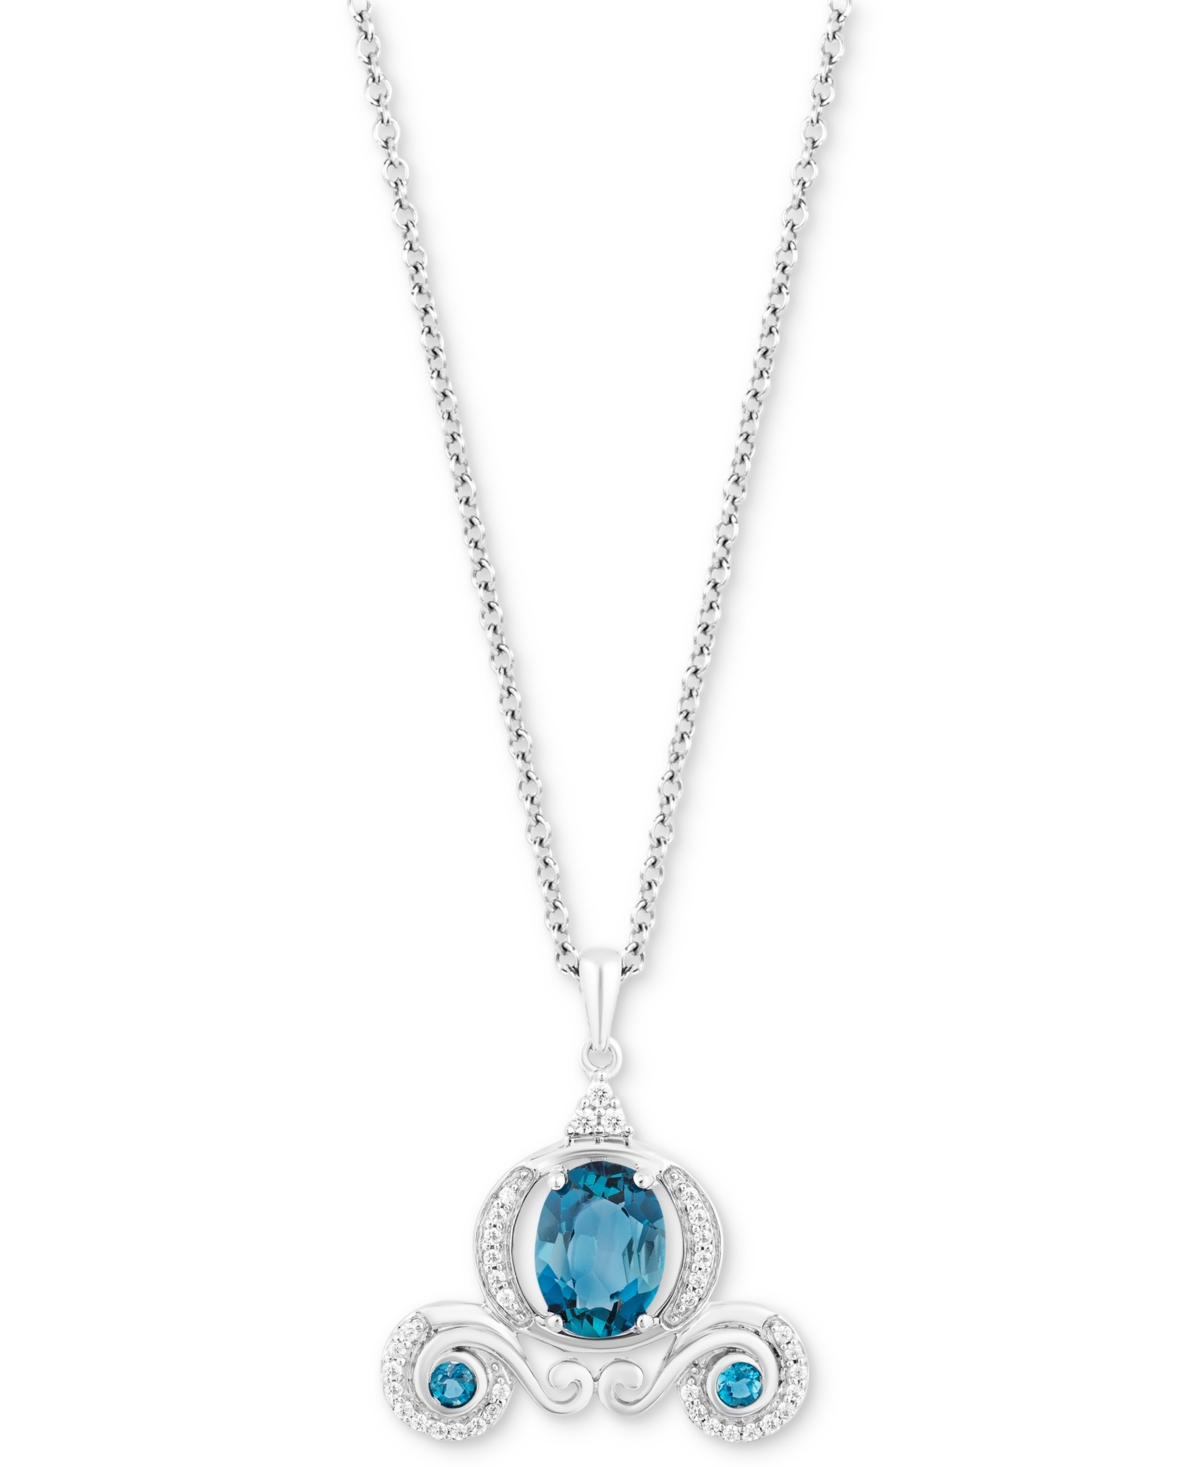 Enchanted Disney Fine Jewelry London Blue Topaz (1-7/8 ct. t.w.) & Diamond (1/10 ct. t.w.) Cinderella Carriage Pendant Necklace in Sterling Silver, 16" + 2" extender